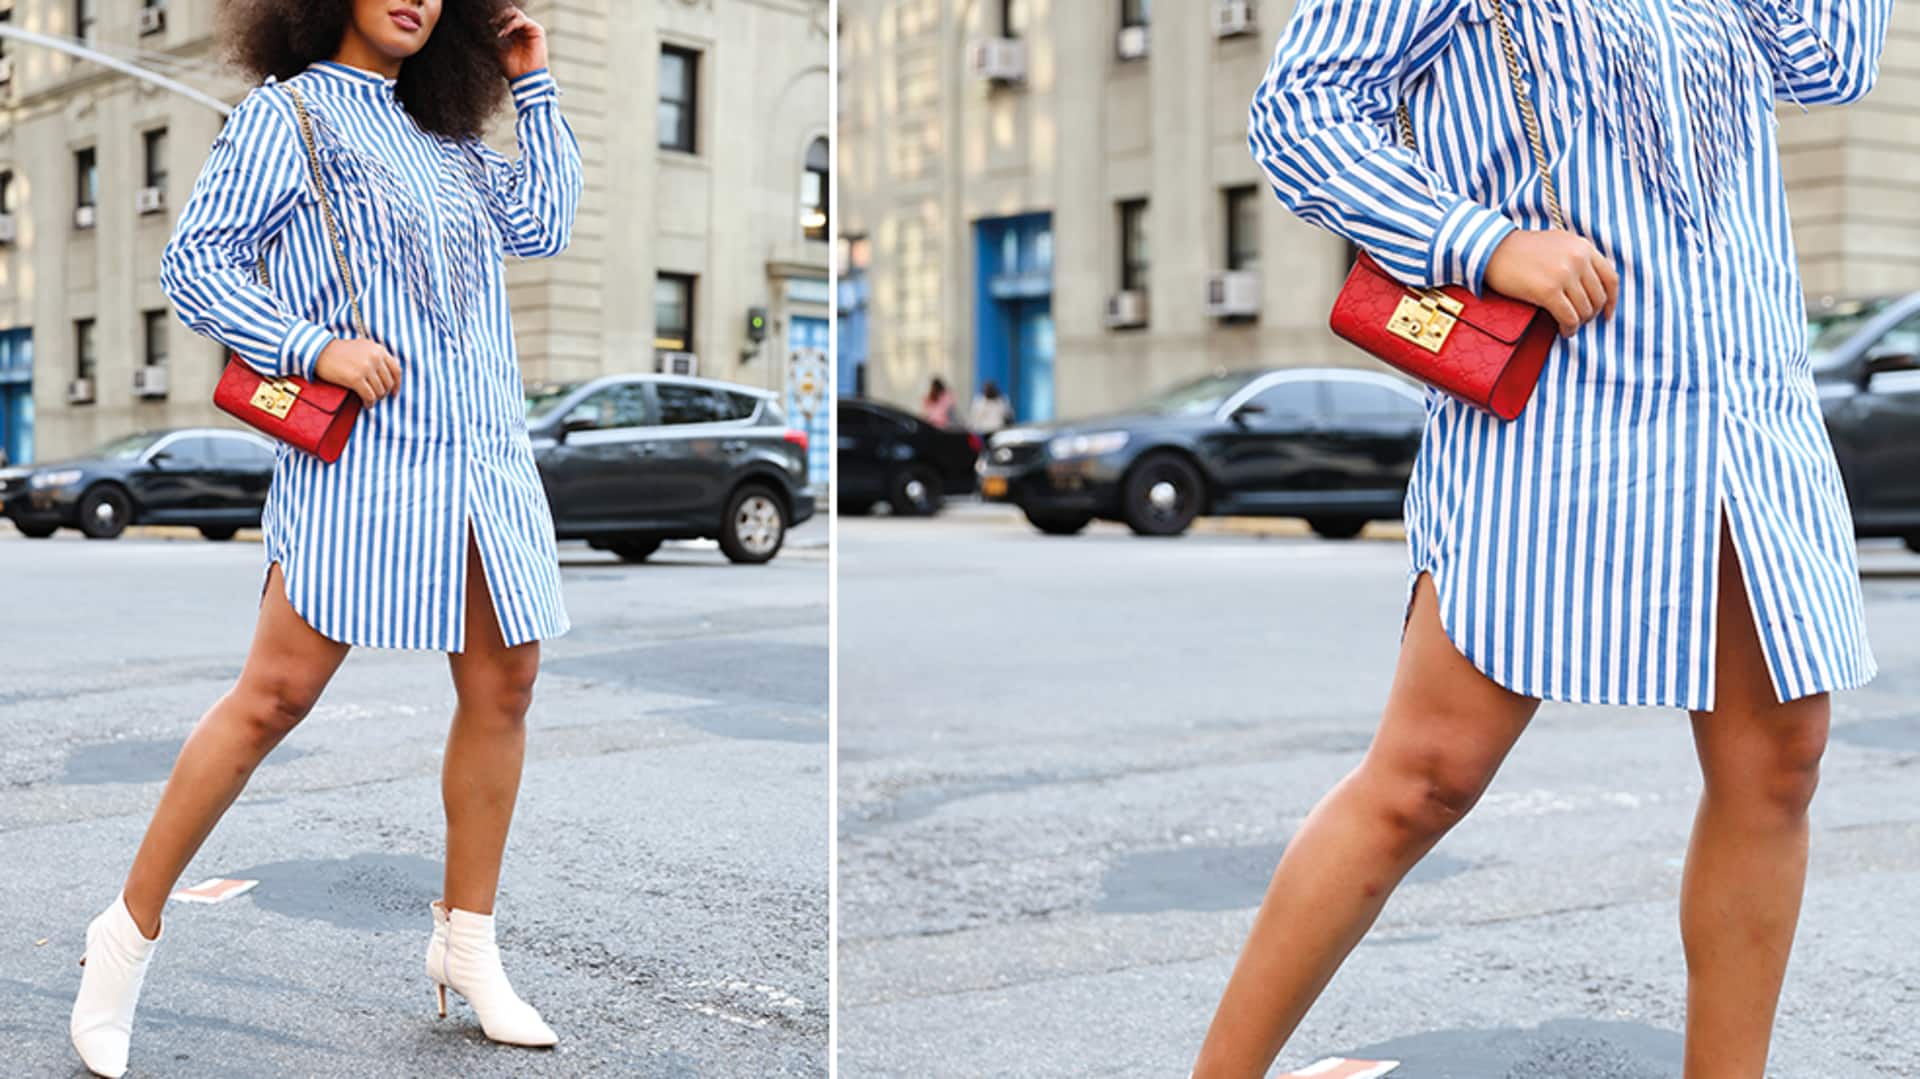 Shirtdress: How to look stylish with this year-round staple